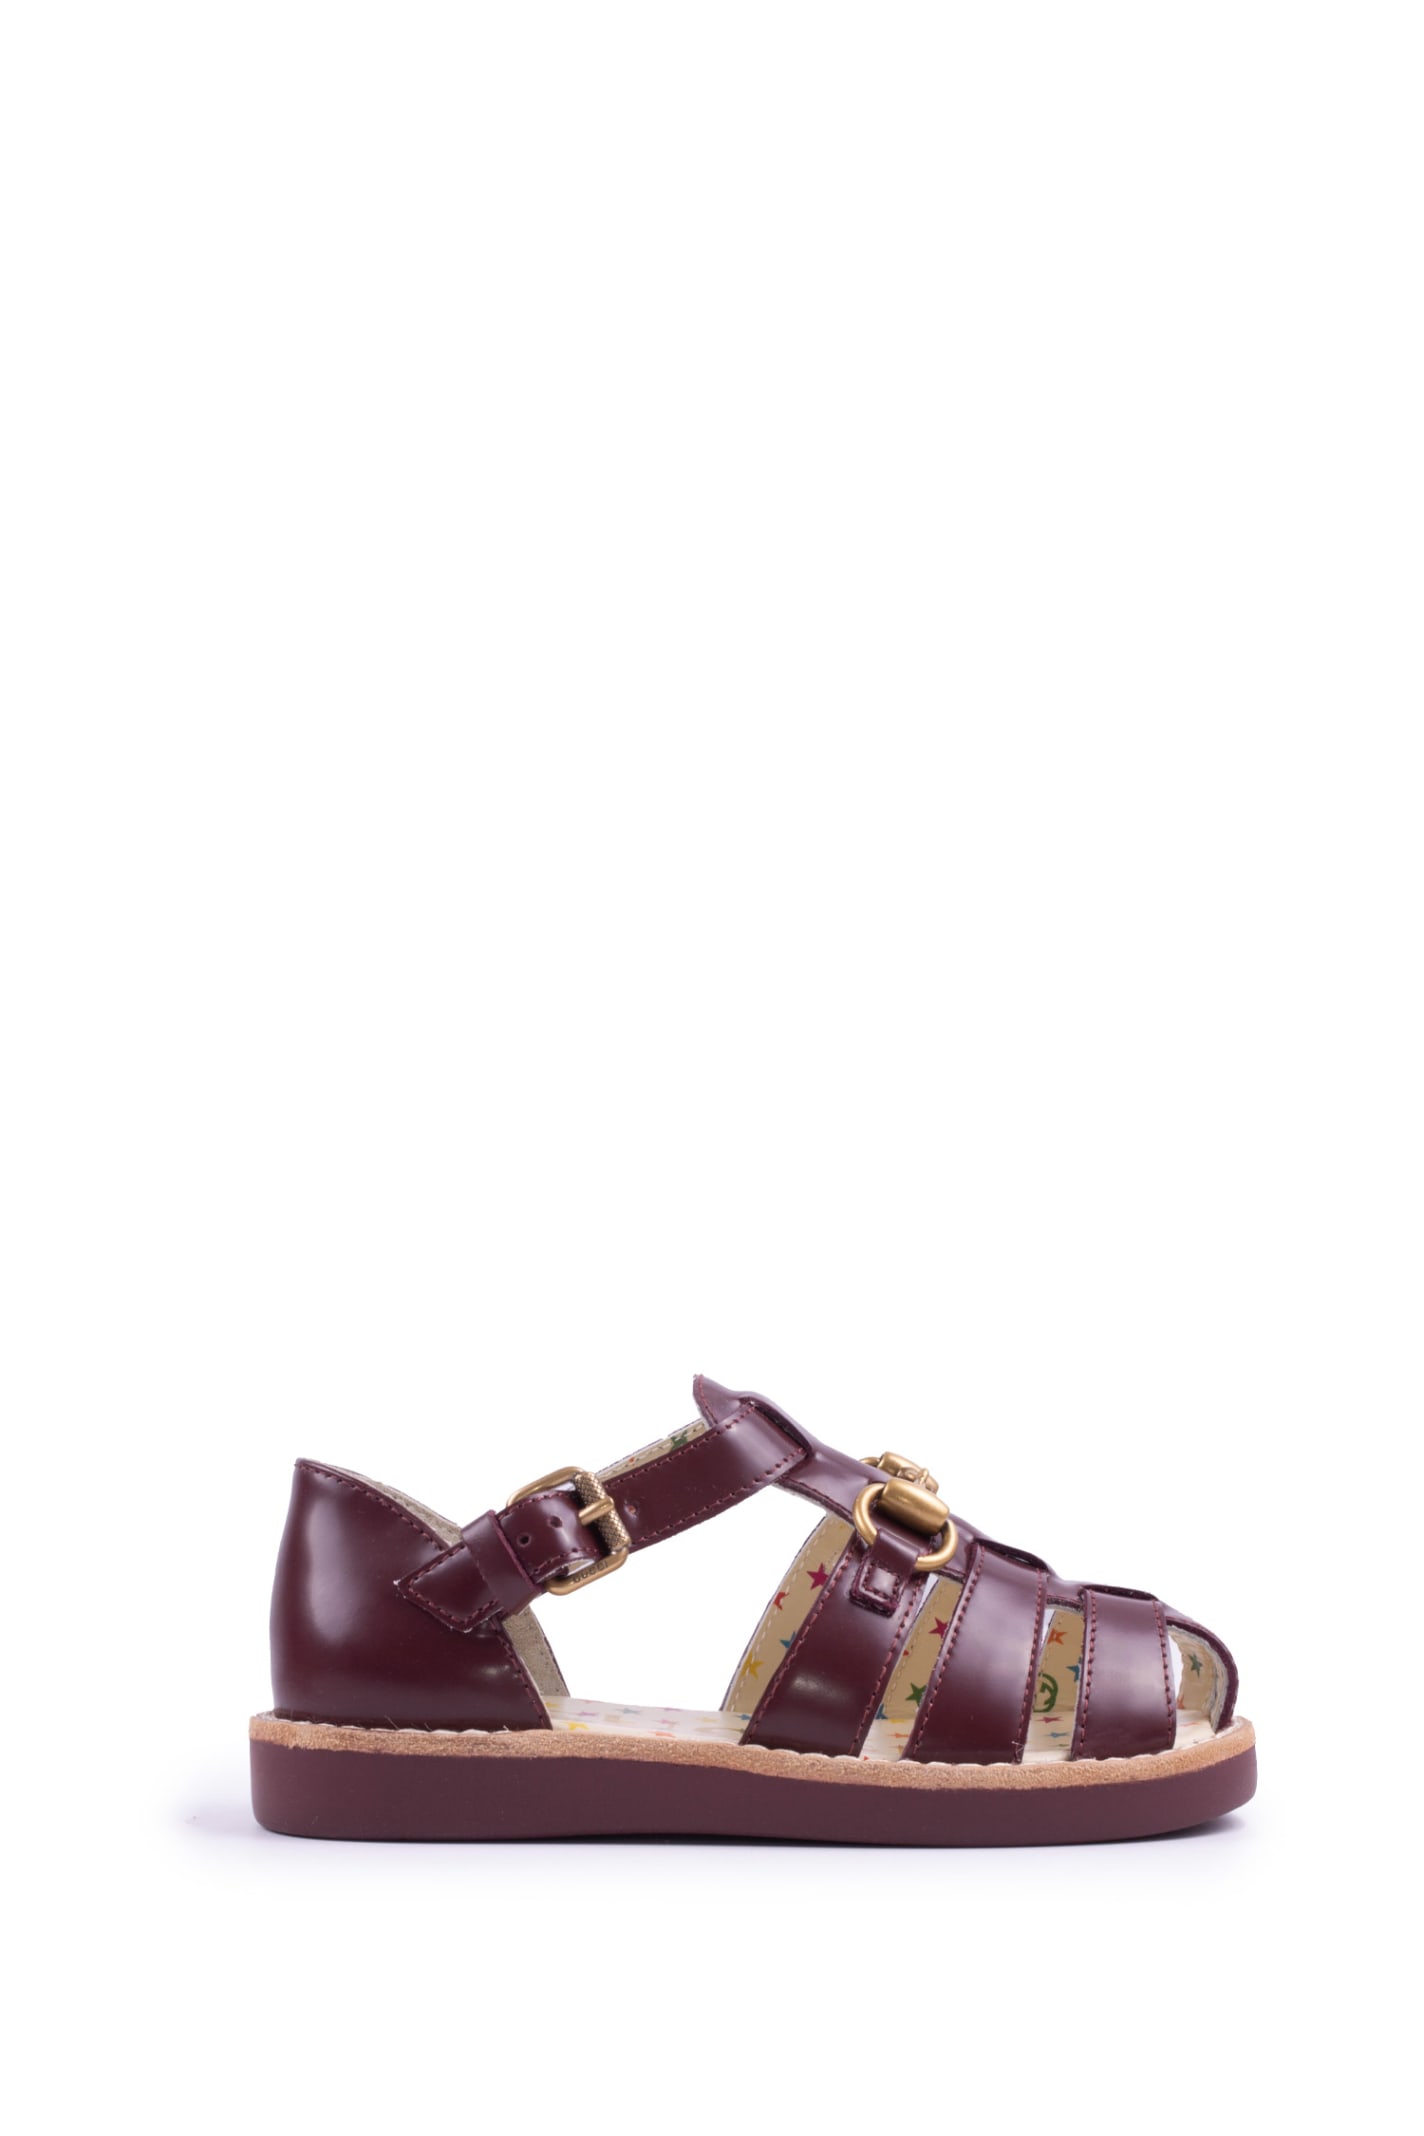 Gucci Kids' Toddlers Sandal With Horsebit In Brown